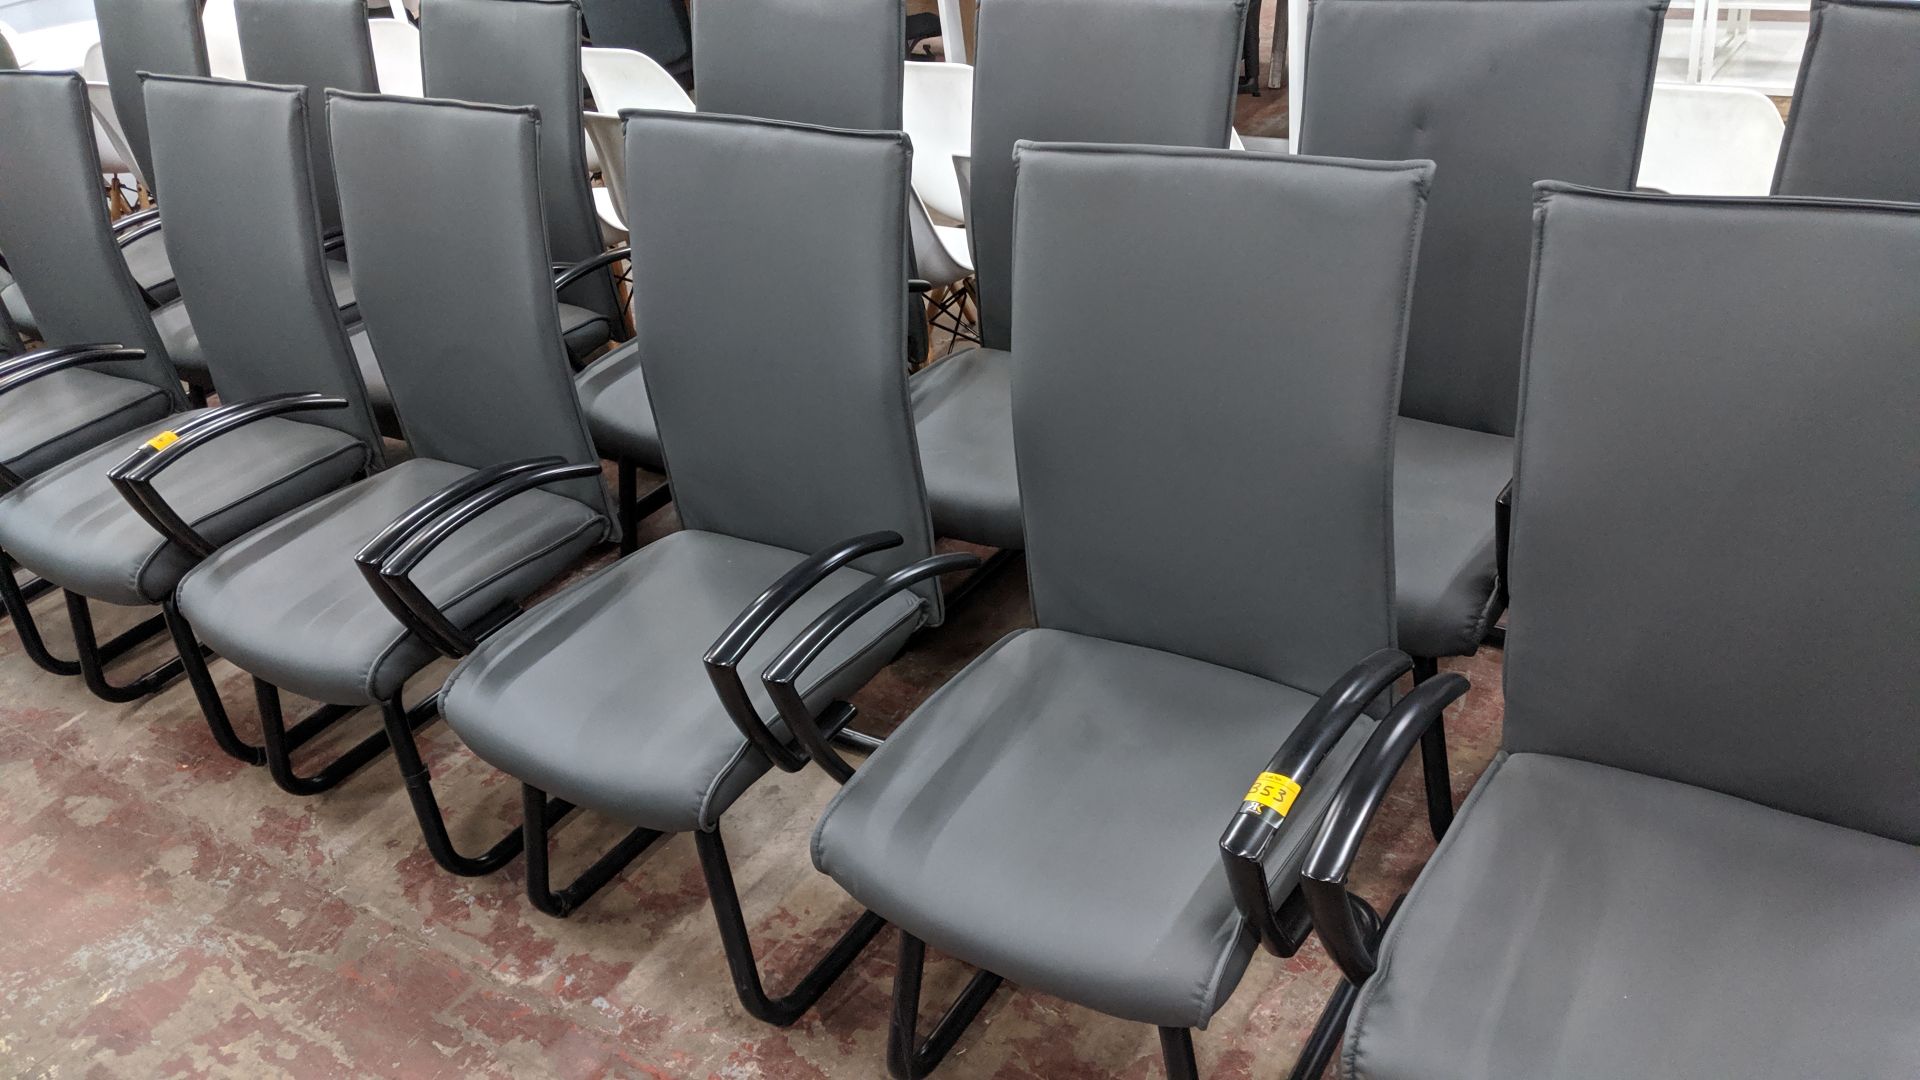 6 off black metal cantilever framed executive/meeting chairs with grey leather-look upholstery NB.